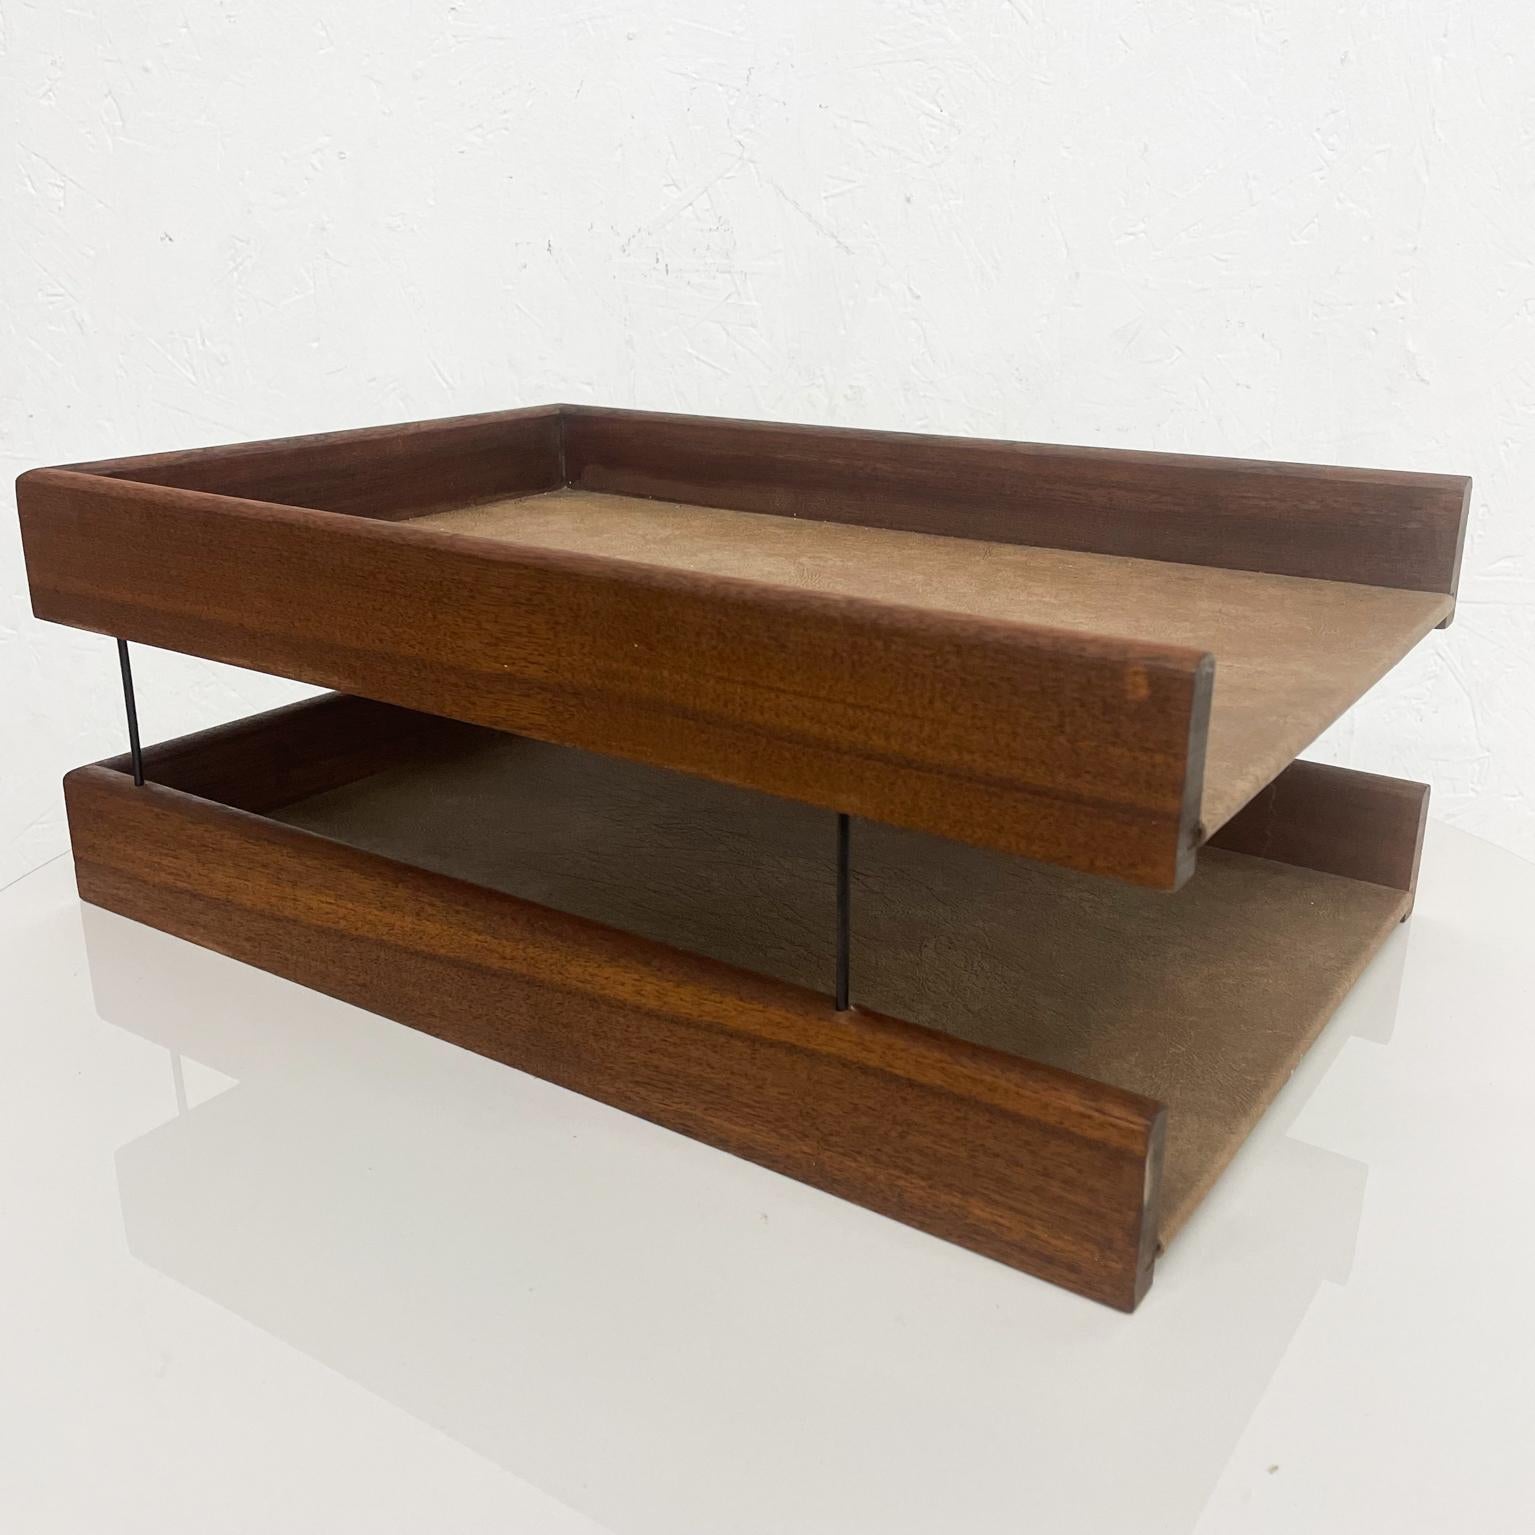 Desk tray
Midcentury modern office tray with two tiers. Walnut and bronze with faux leather cover.
No label. USA circa 1970s
Solid beautifully grained walnut wood
Sturdy construction with two levels supported by metal rods.
Measures: 15.75